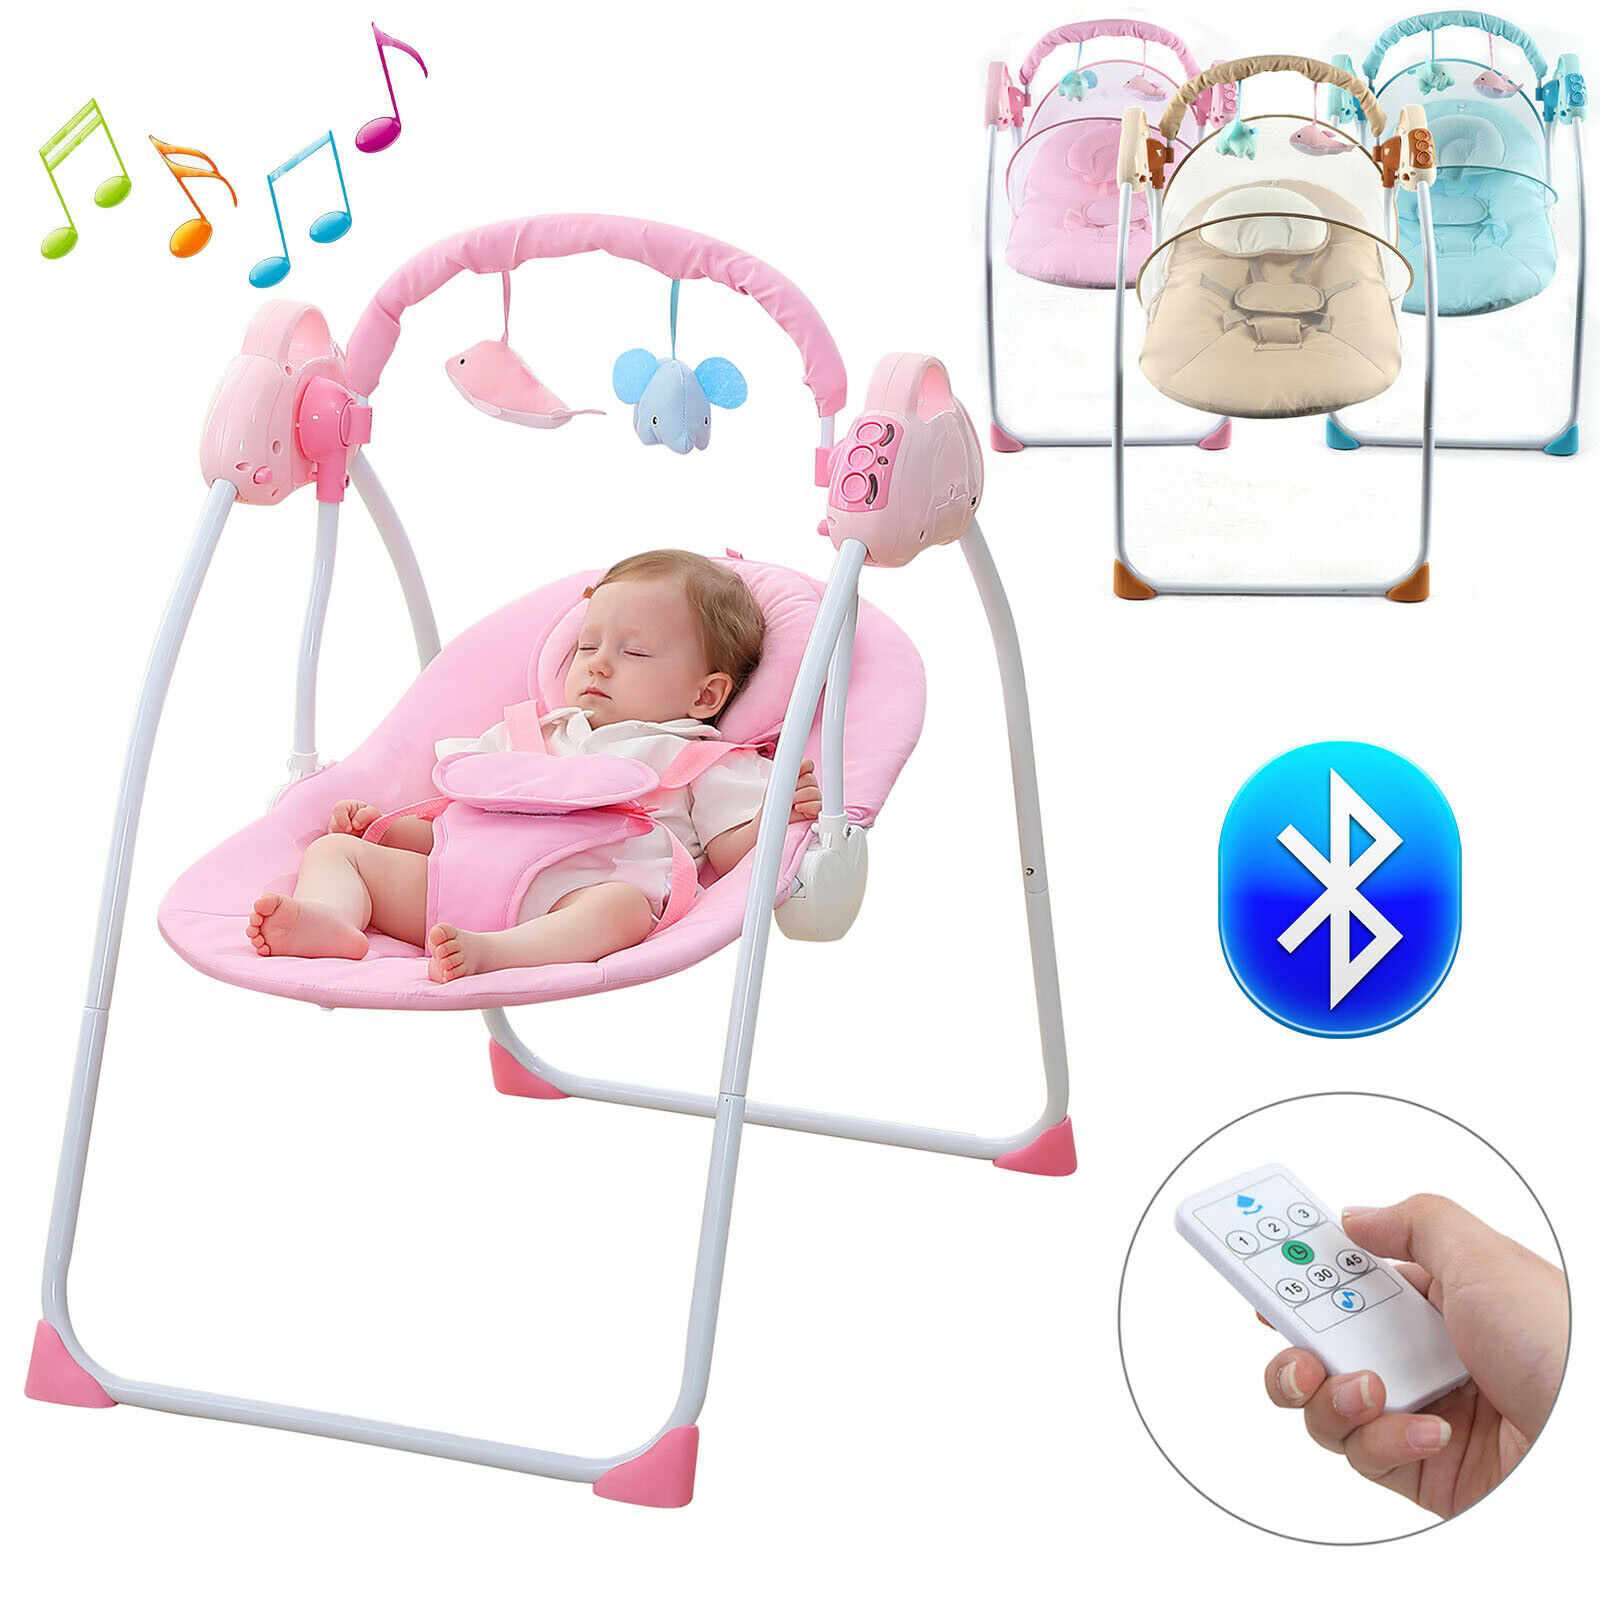 Baby Bouncer Swing Seat Rocker Portable Electric With Music Infant Cradle Chair